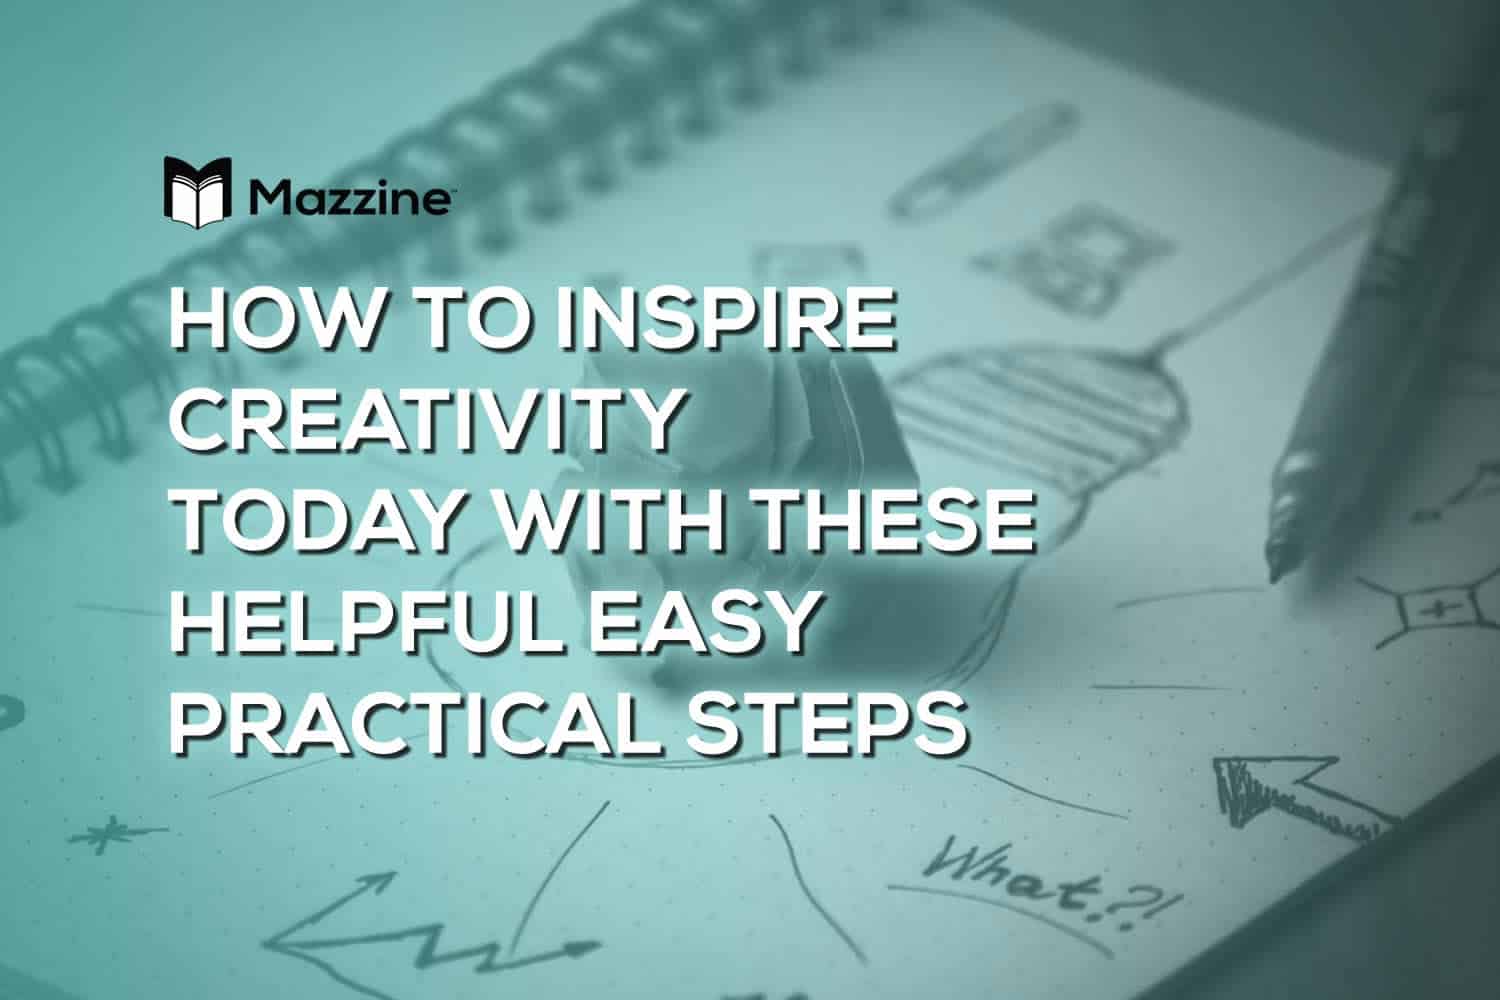 How to Inspire Your Creativity Today With These Helpful Easy Practical Steps